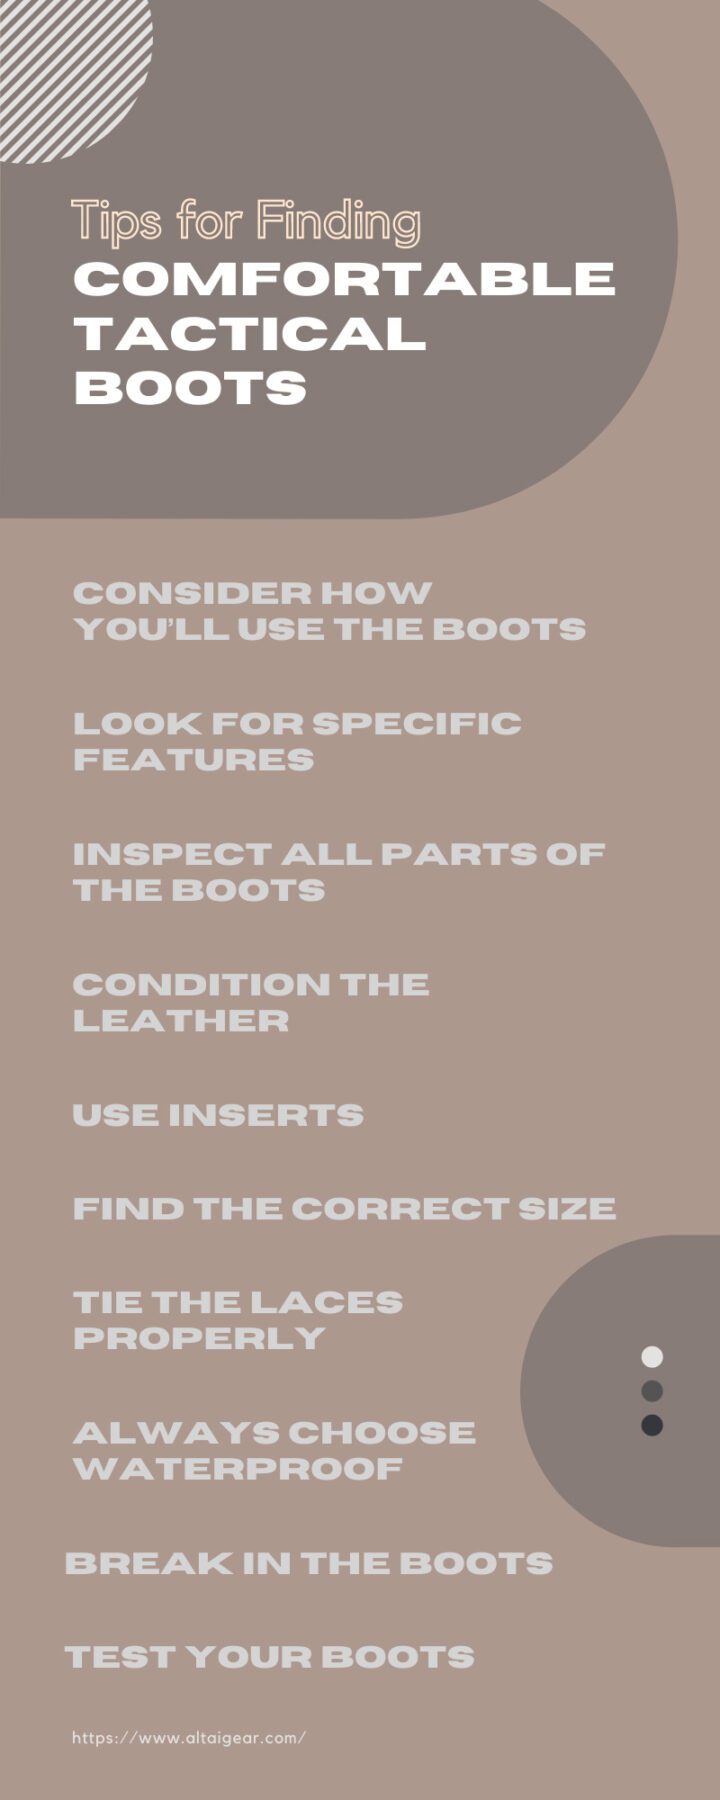 Tips for Finding Comfortable Tactical Boots